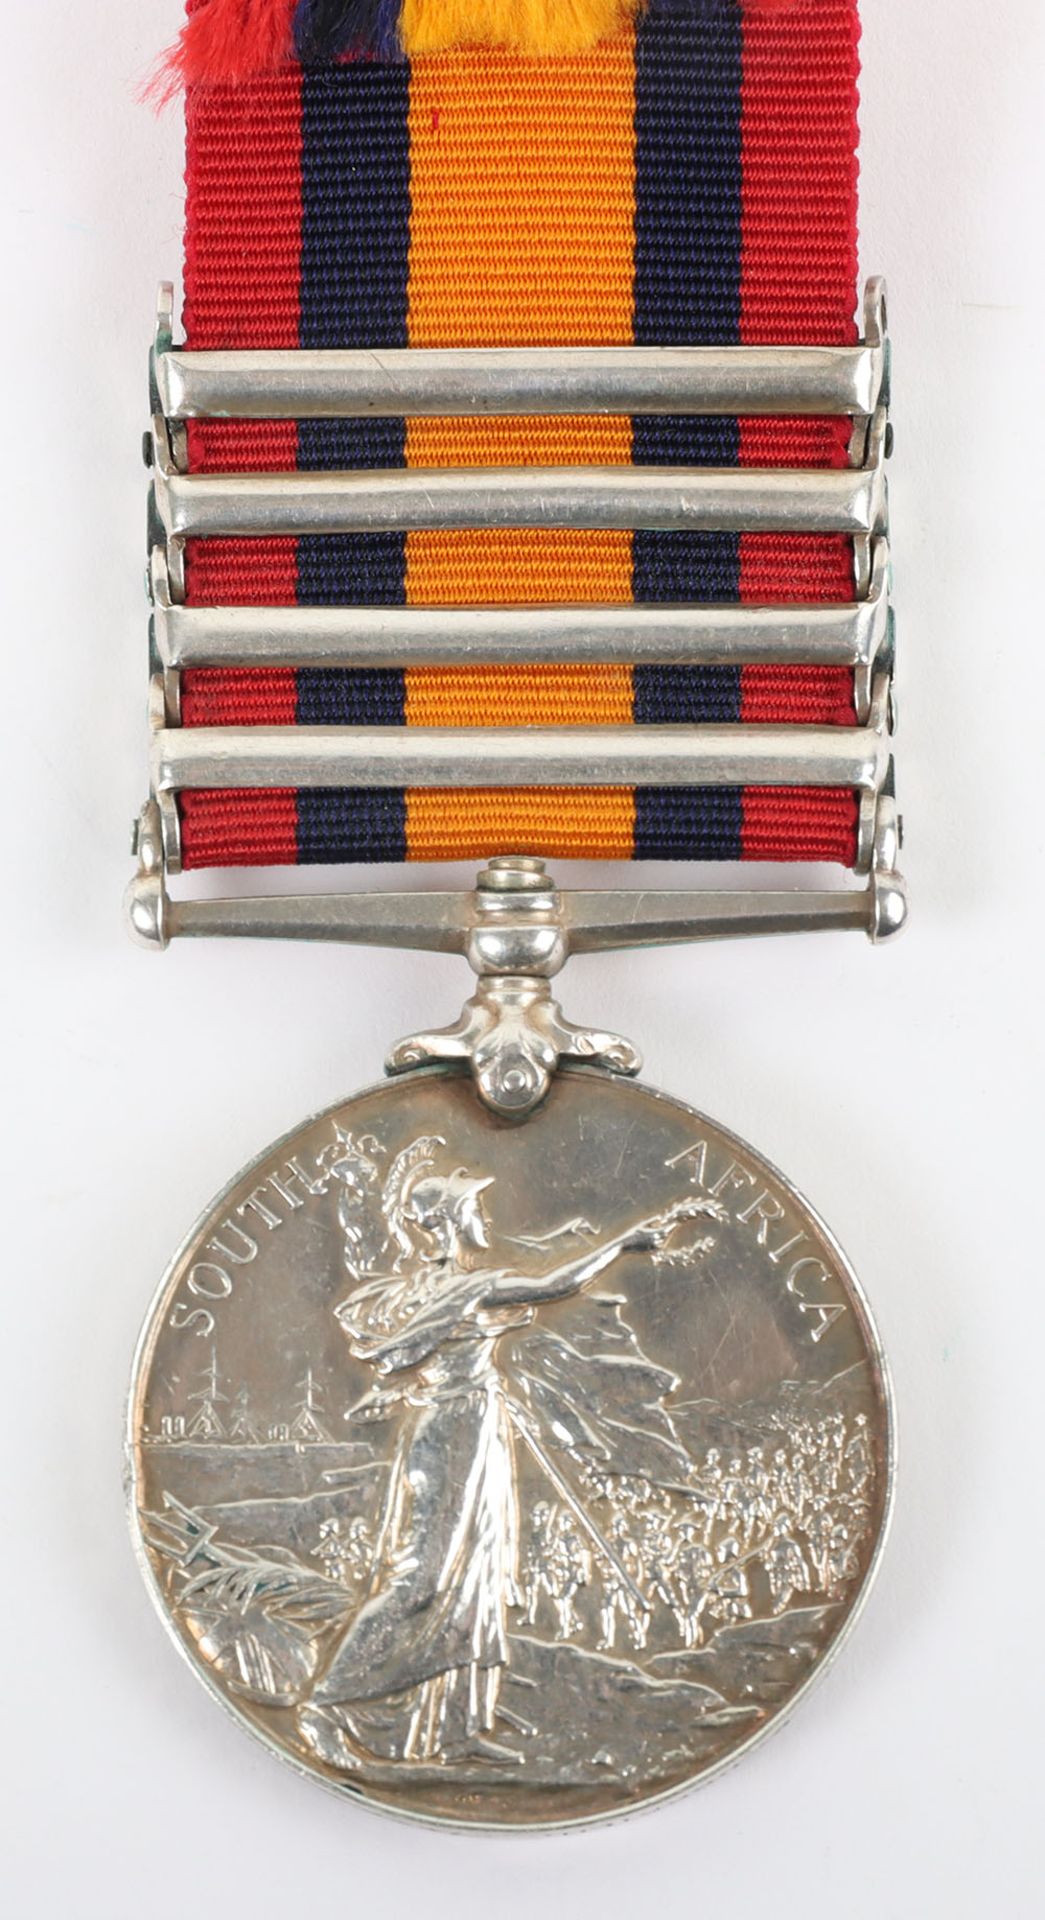 Queens South Africa Medal to 19th Battalion Imperial Yeomanry (Paget’s Horse) - Image 2 of 8